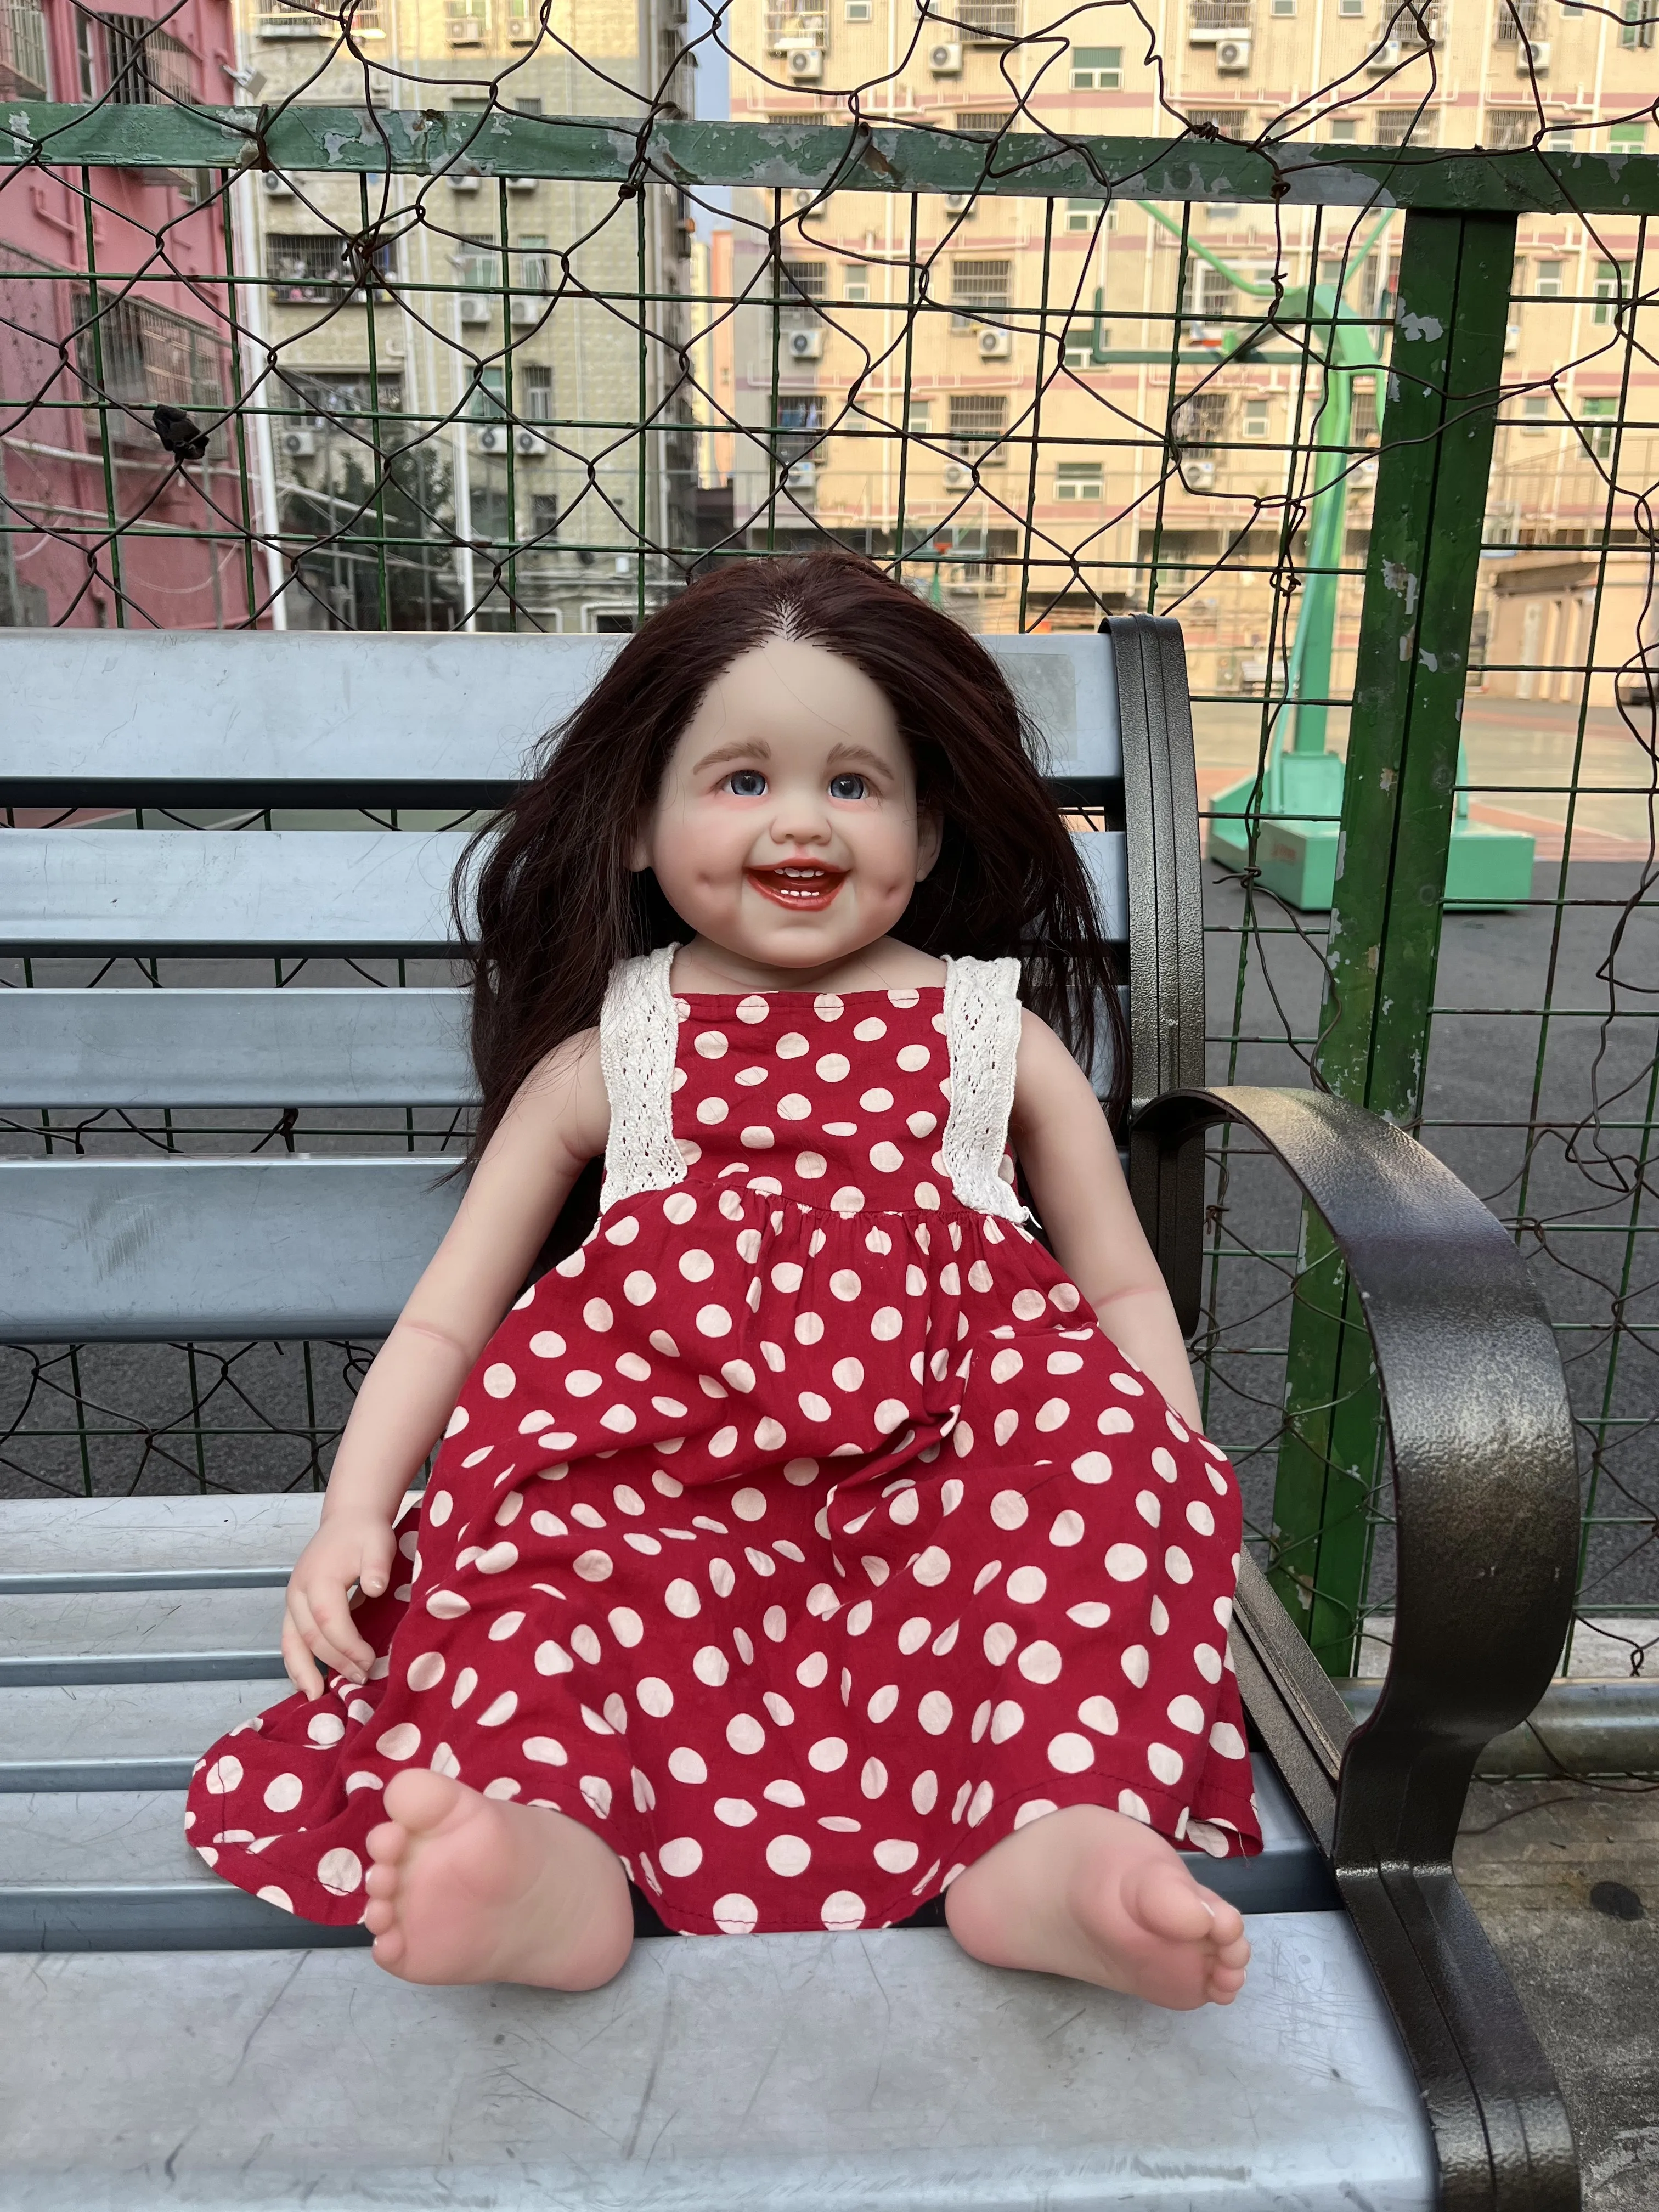 FBBD Customized Limited Supply 32inch Rebron Baby Dimple With Hand-Rooted Long Brown Curly Hair Alredady Finished Doll